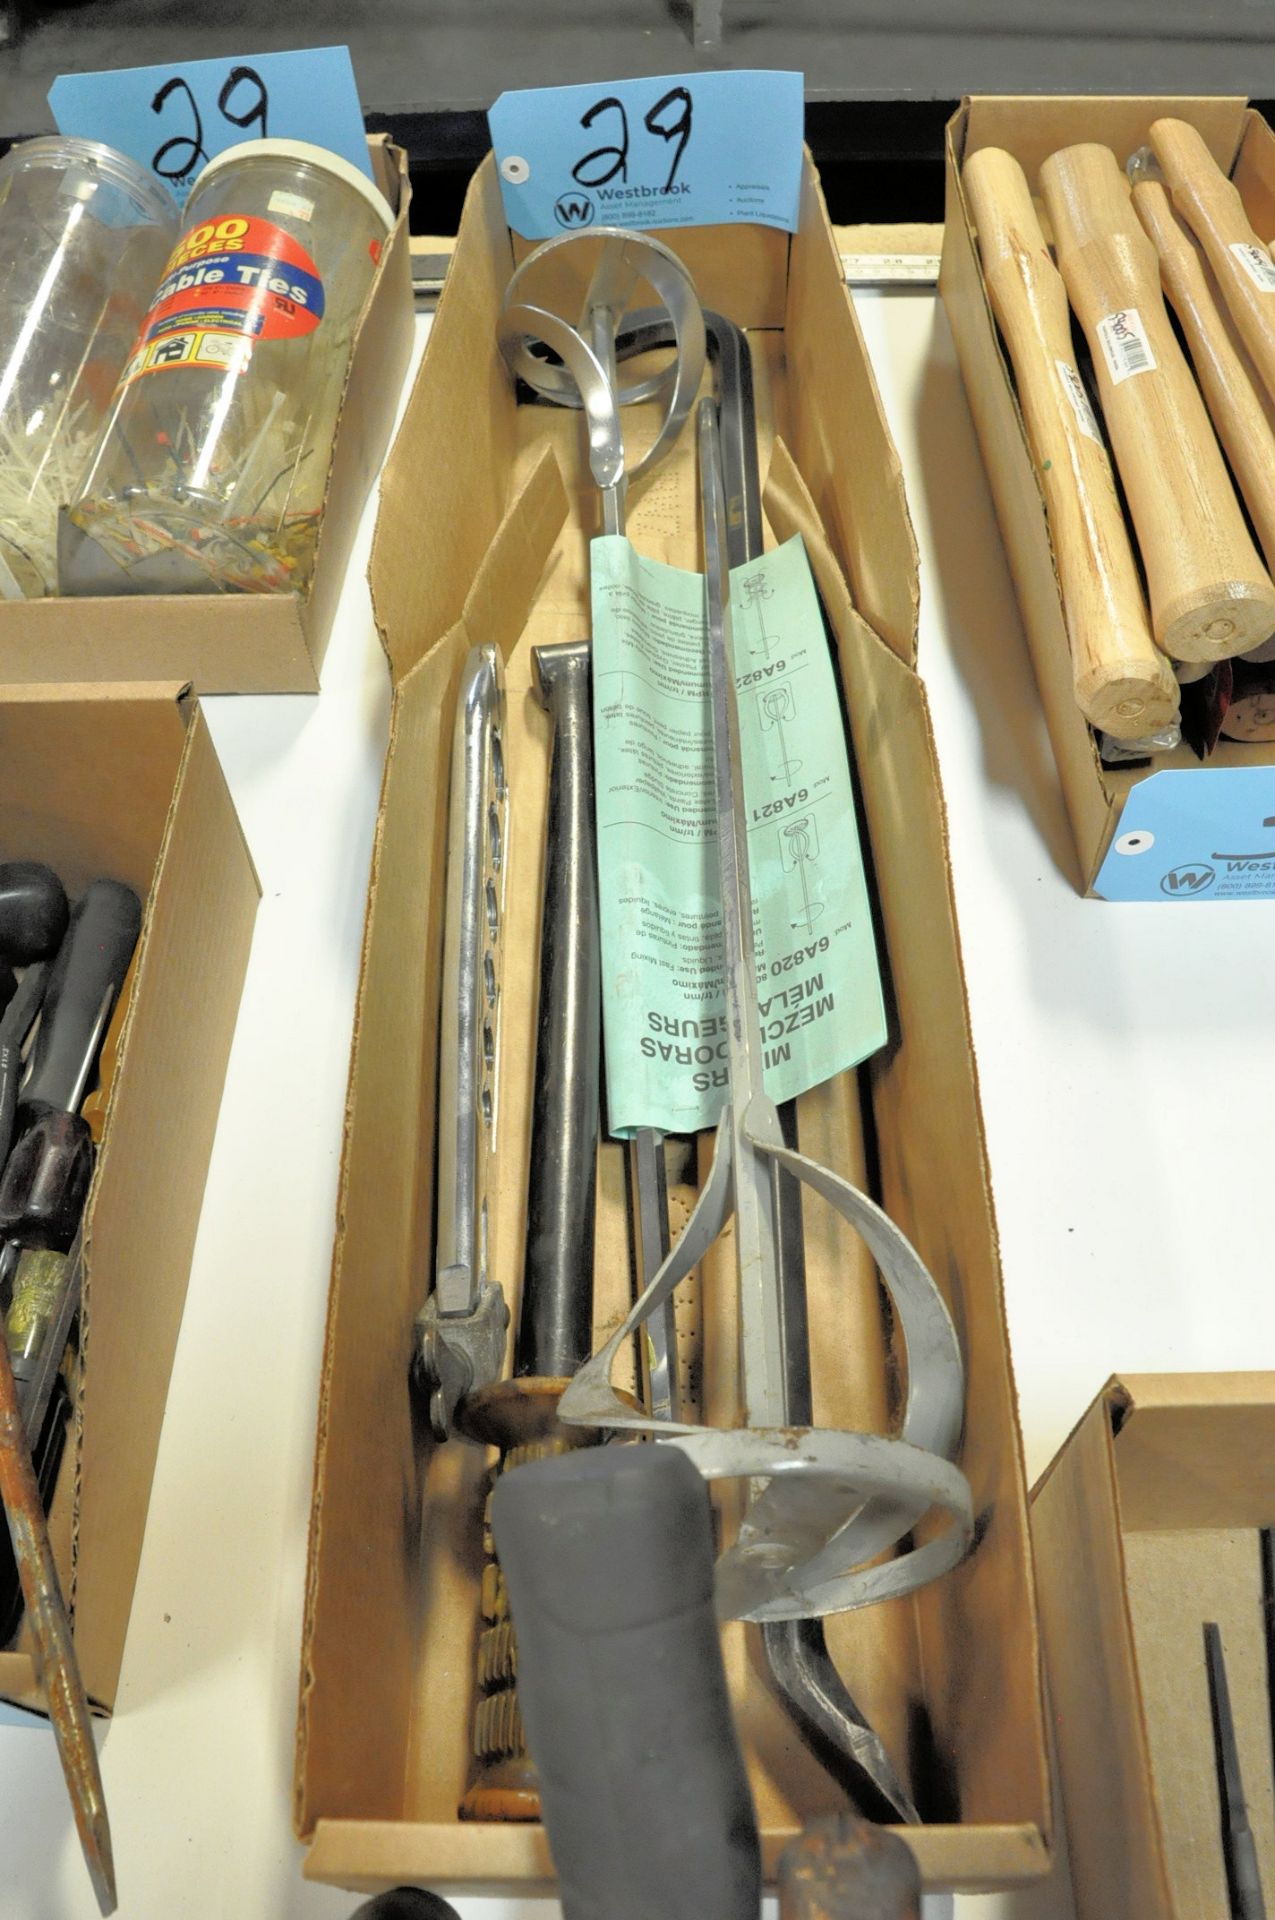 Lot-Mallets, Paint Mixer Attachments, Screwdrivers, Magnet, Cable Ties, etc. in (9) Boxes - Image 6 of 7